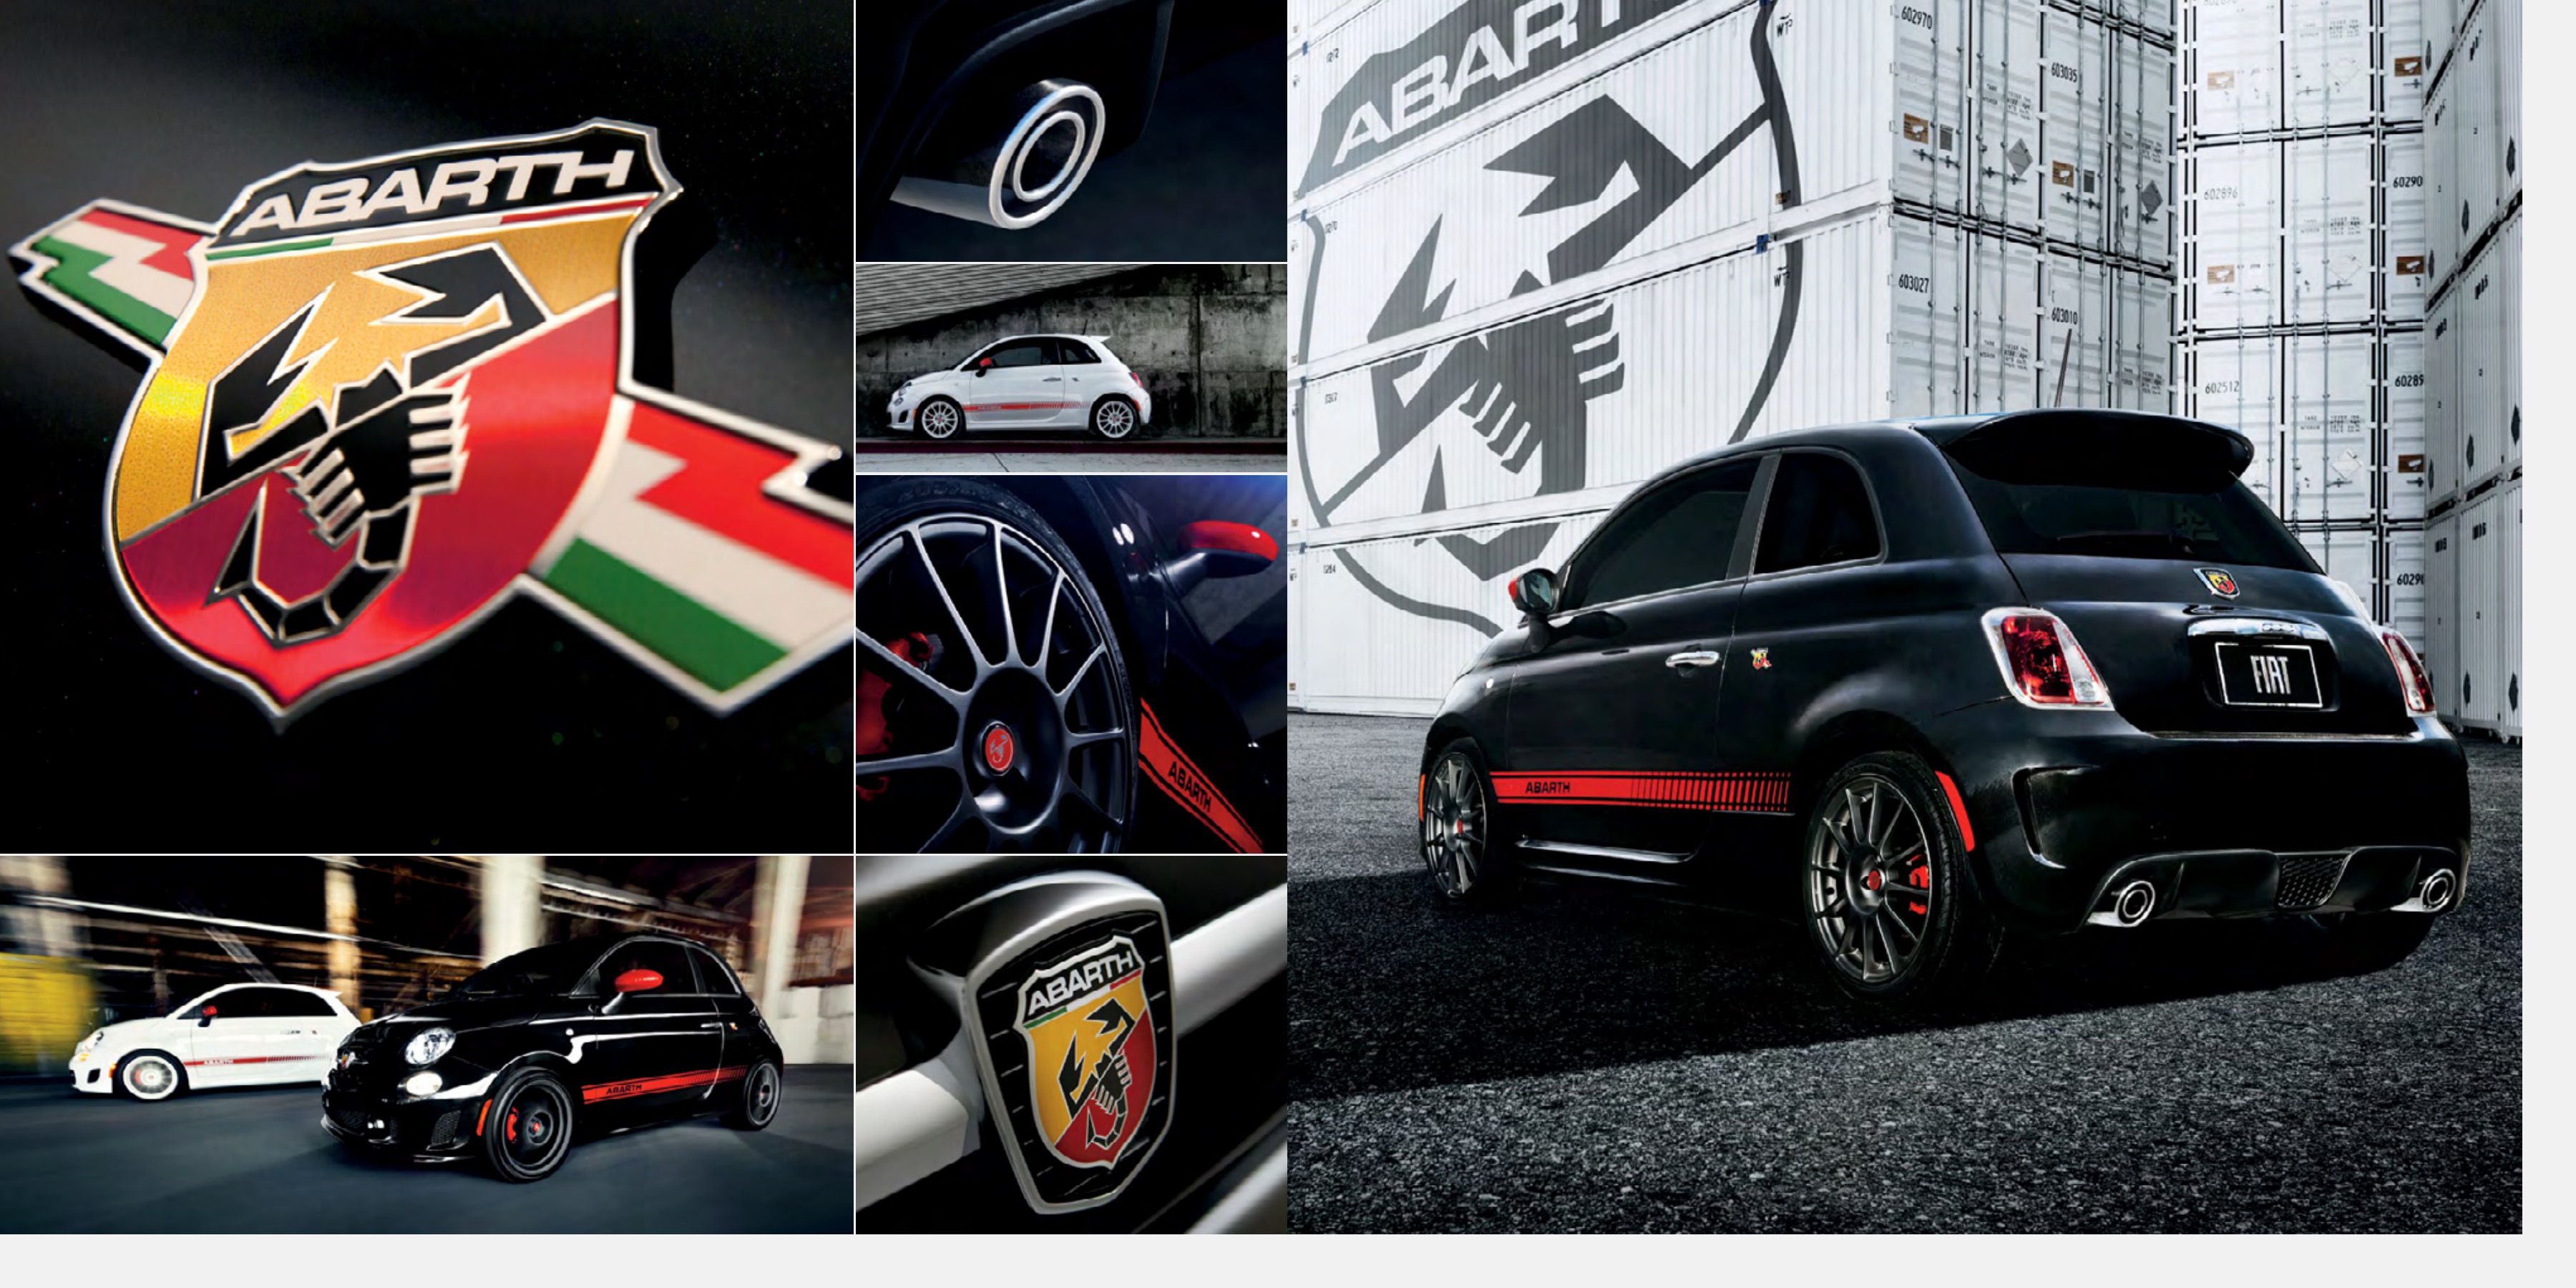 2014 Fiat 500 Abarth Brochure Page 1